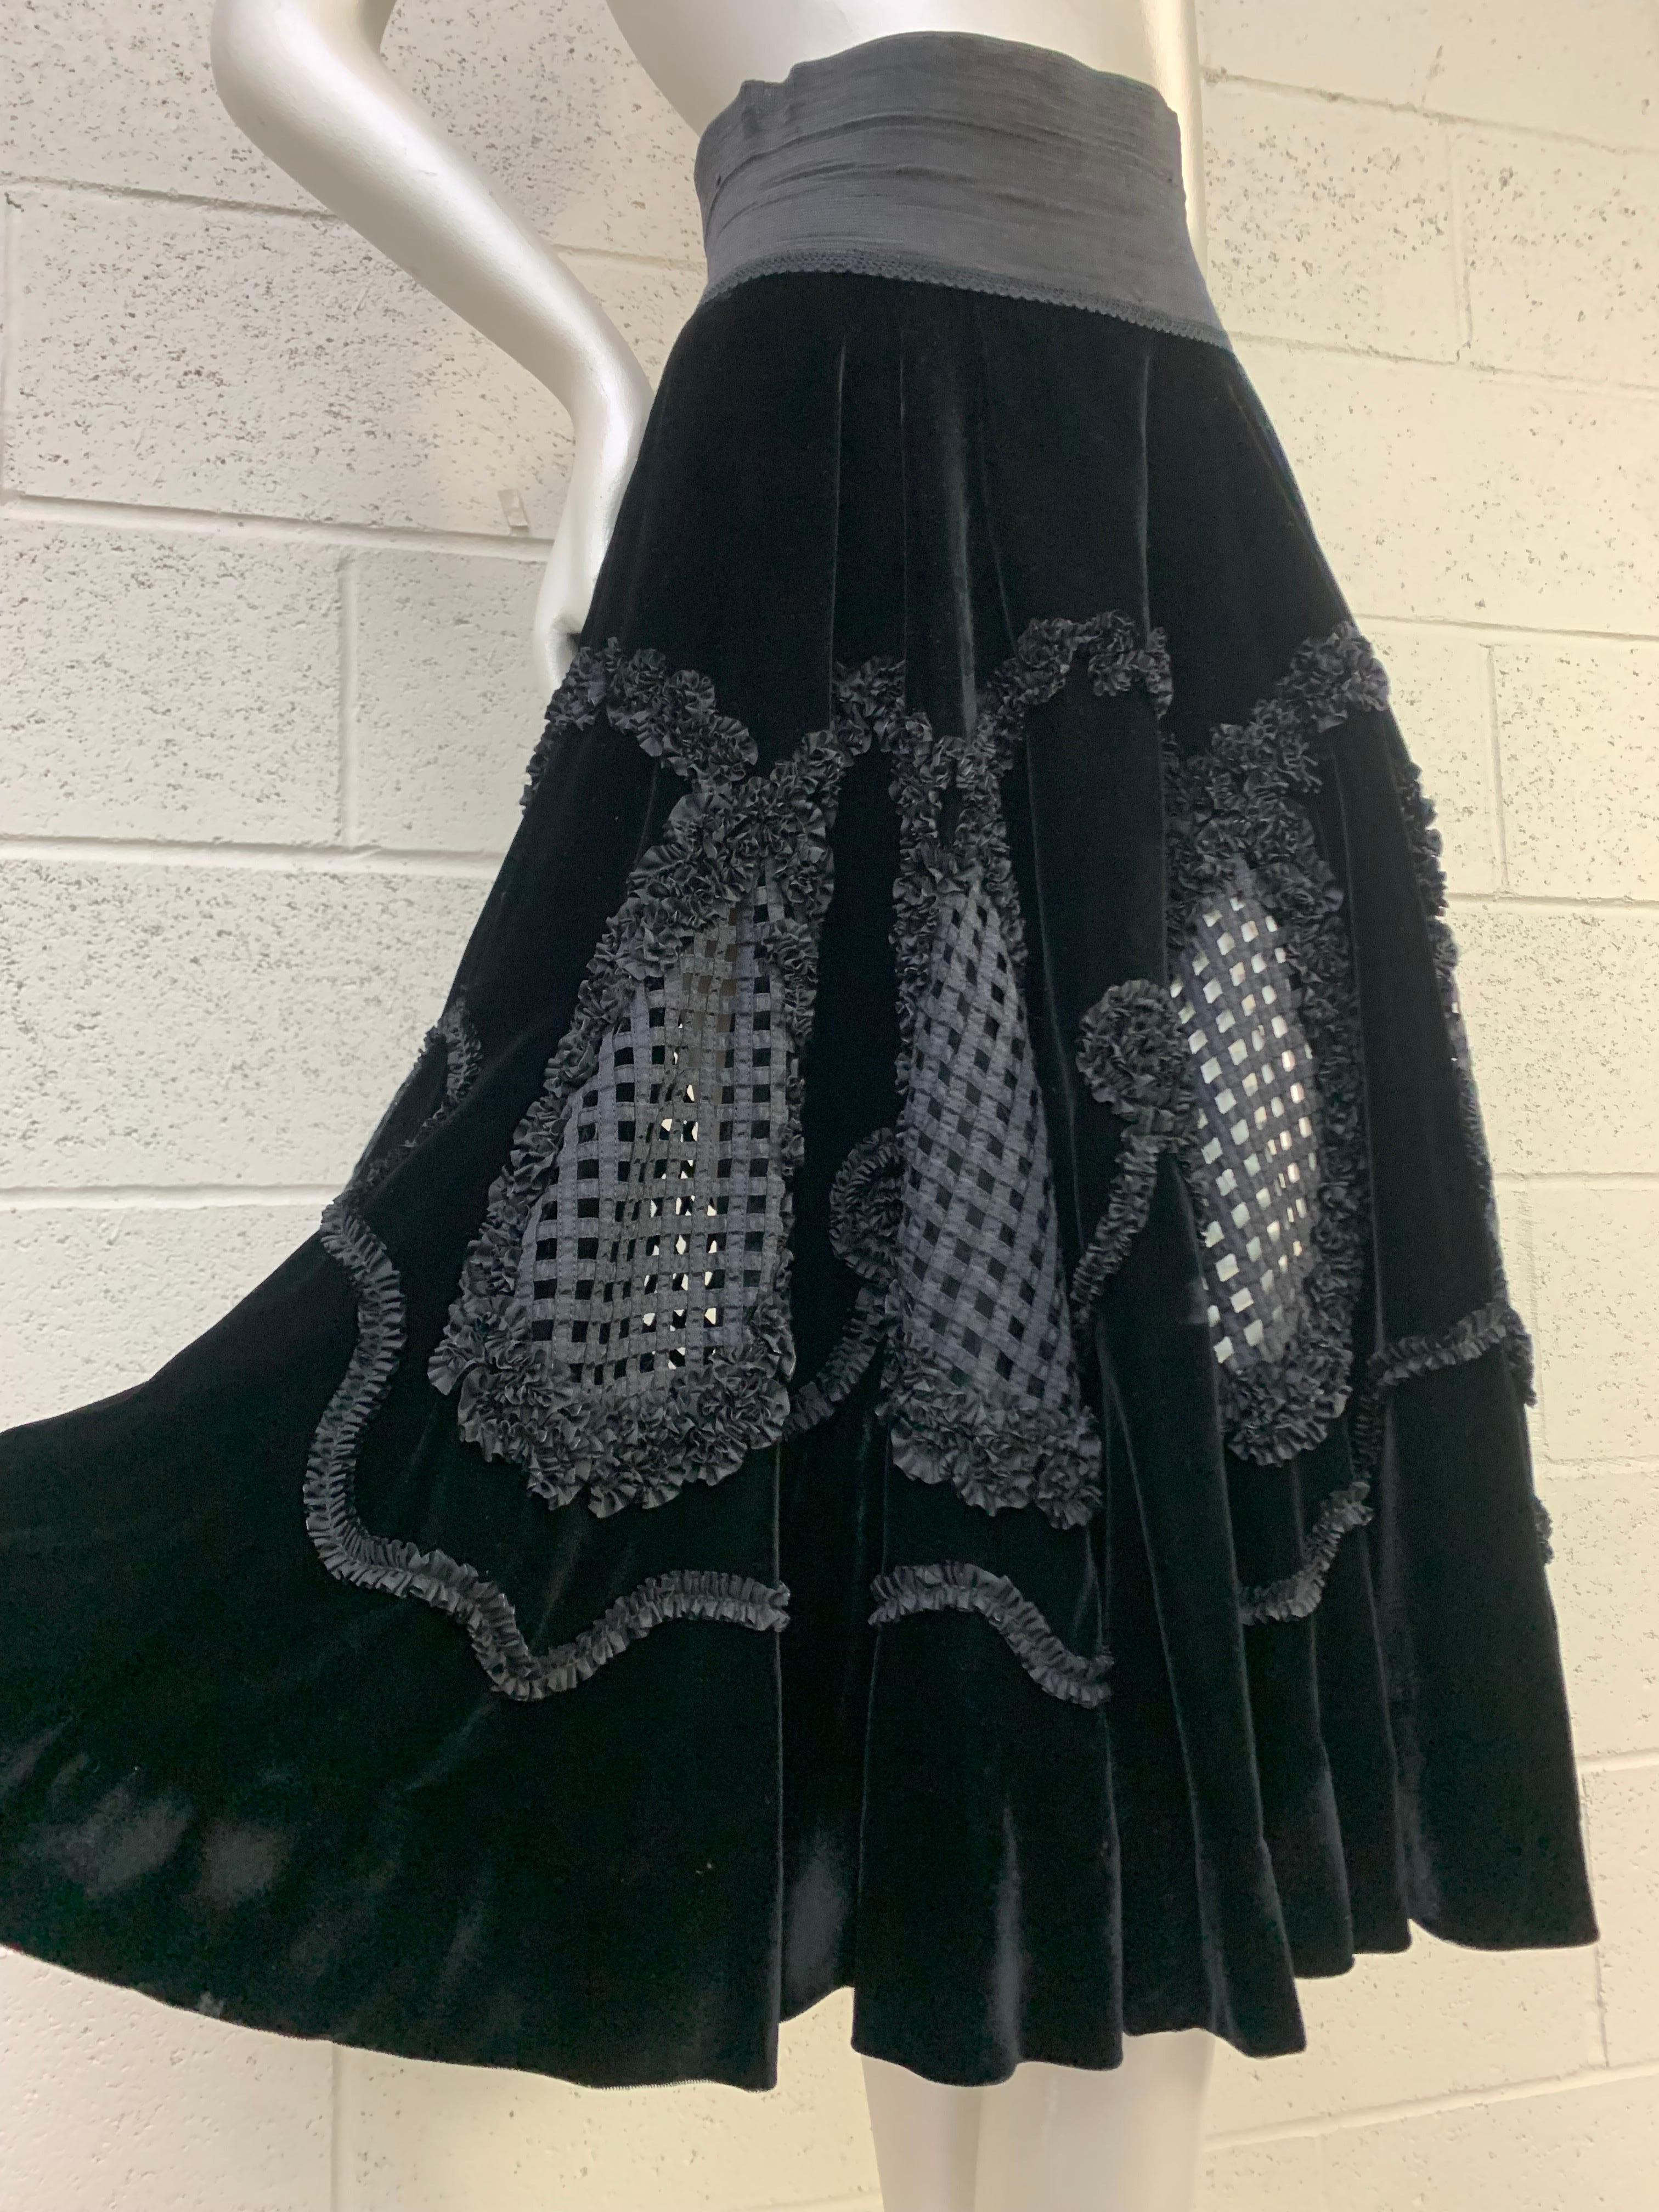 1950s Cadillac Black Silk Velvet Circle Skirt w Wide Waistband & Lattice Design: An extravagant and unusual lattice-work ribbion and ruffled design with peek-a-boo insets. Wide elasticized waistband added for a dramatic silhouette. Fits up to a US